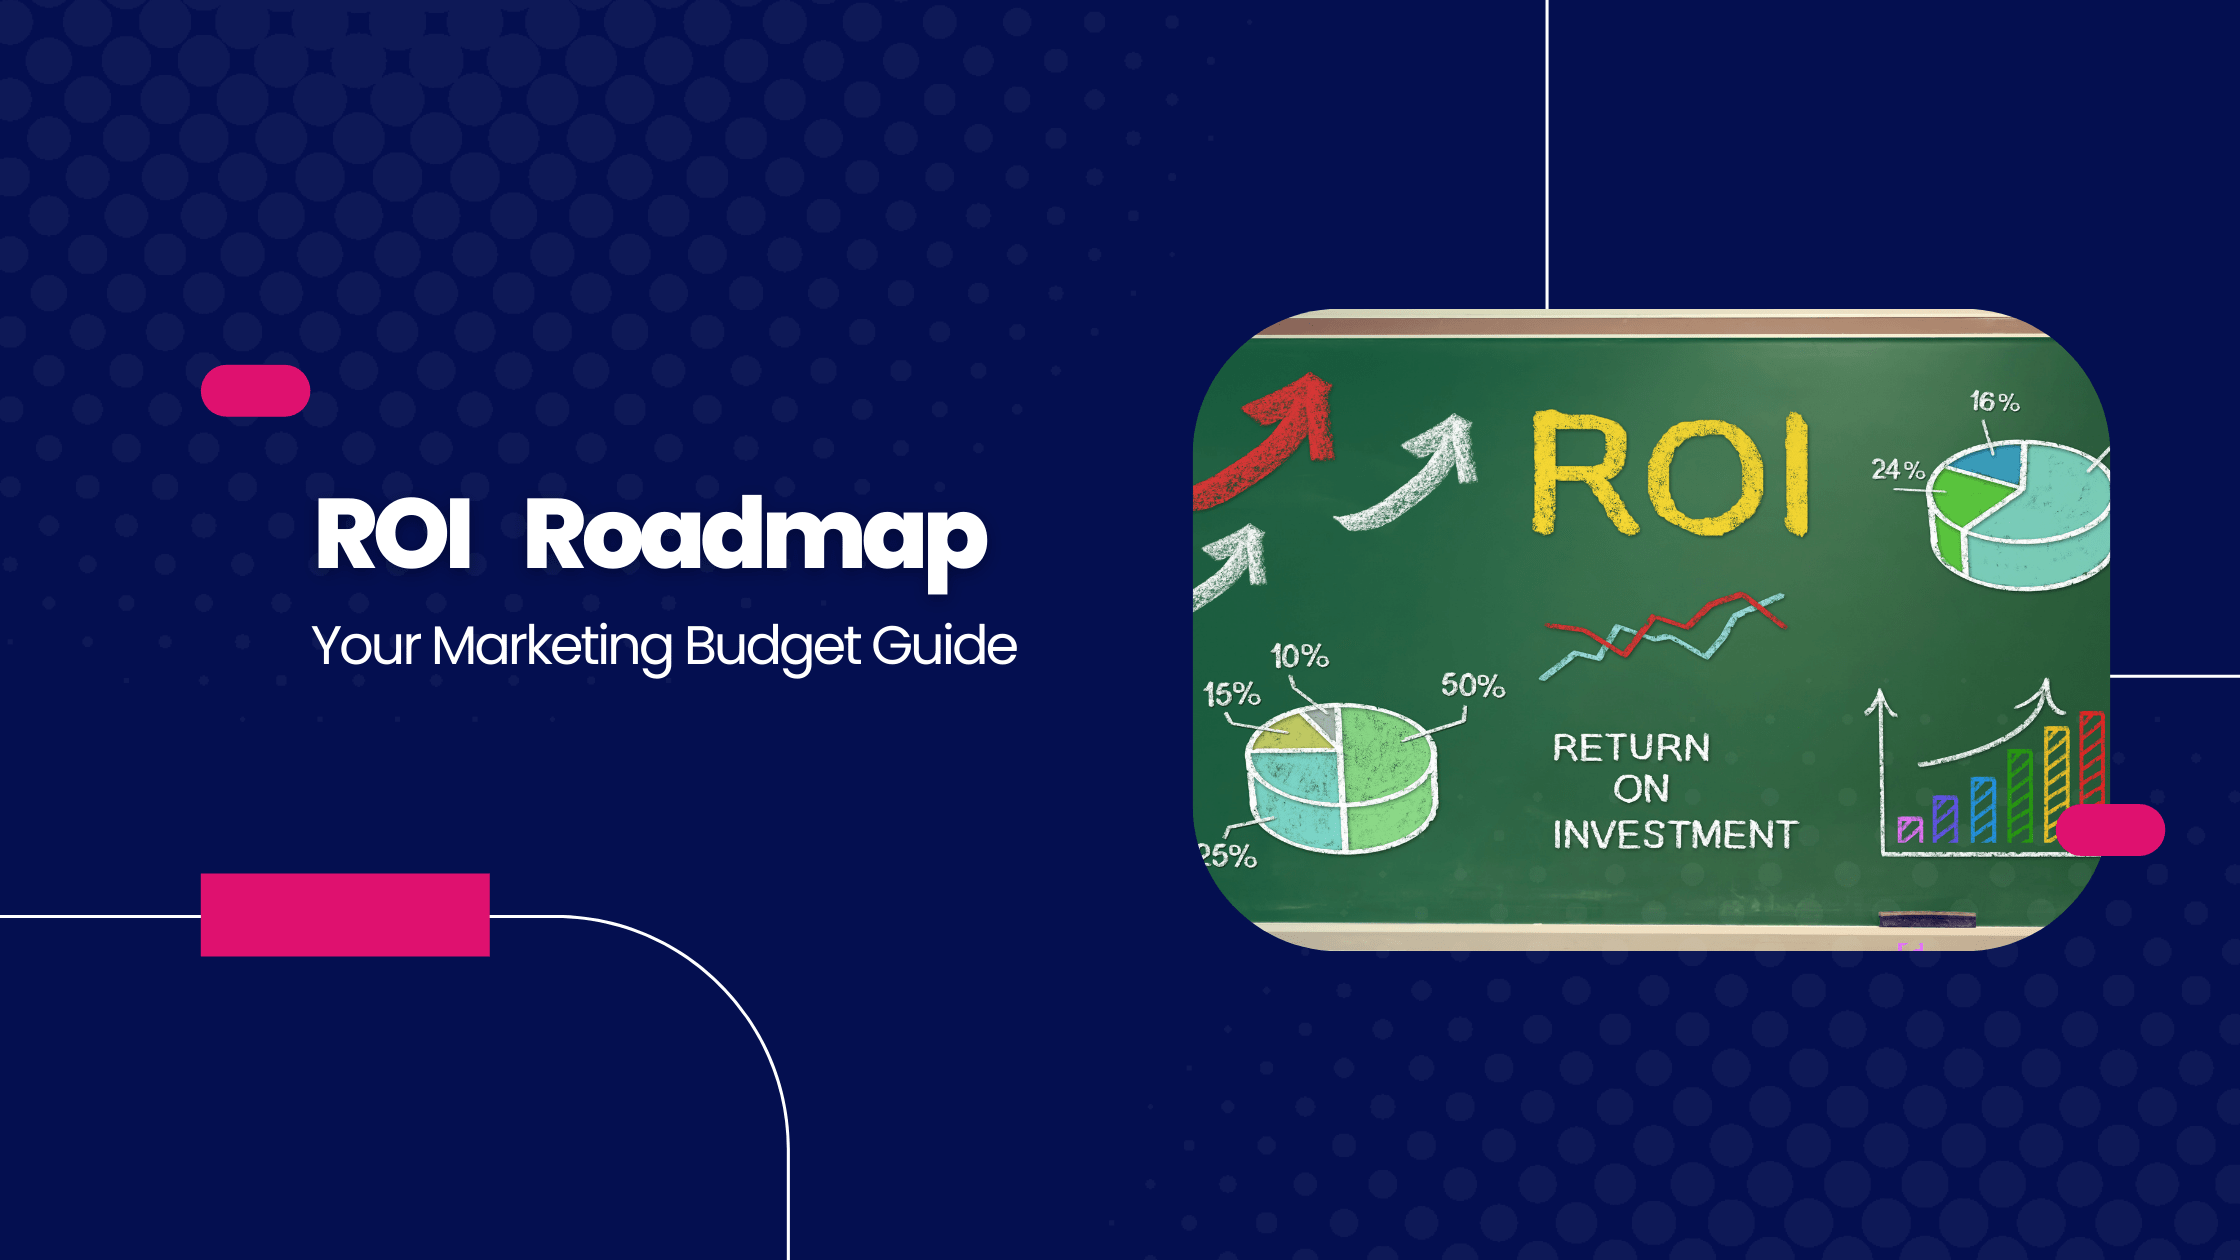 ROI Roadmap: Your Marketing Budget Guide